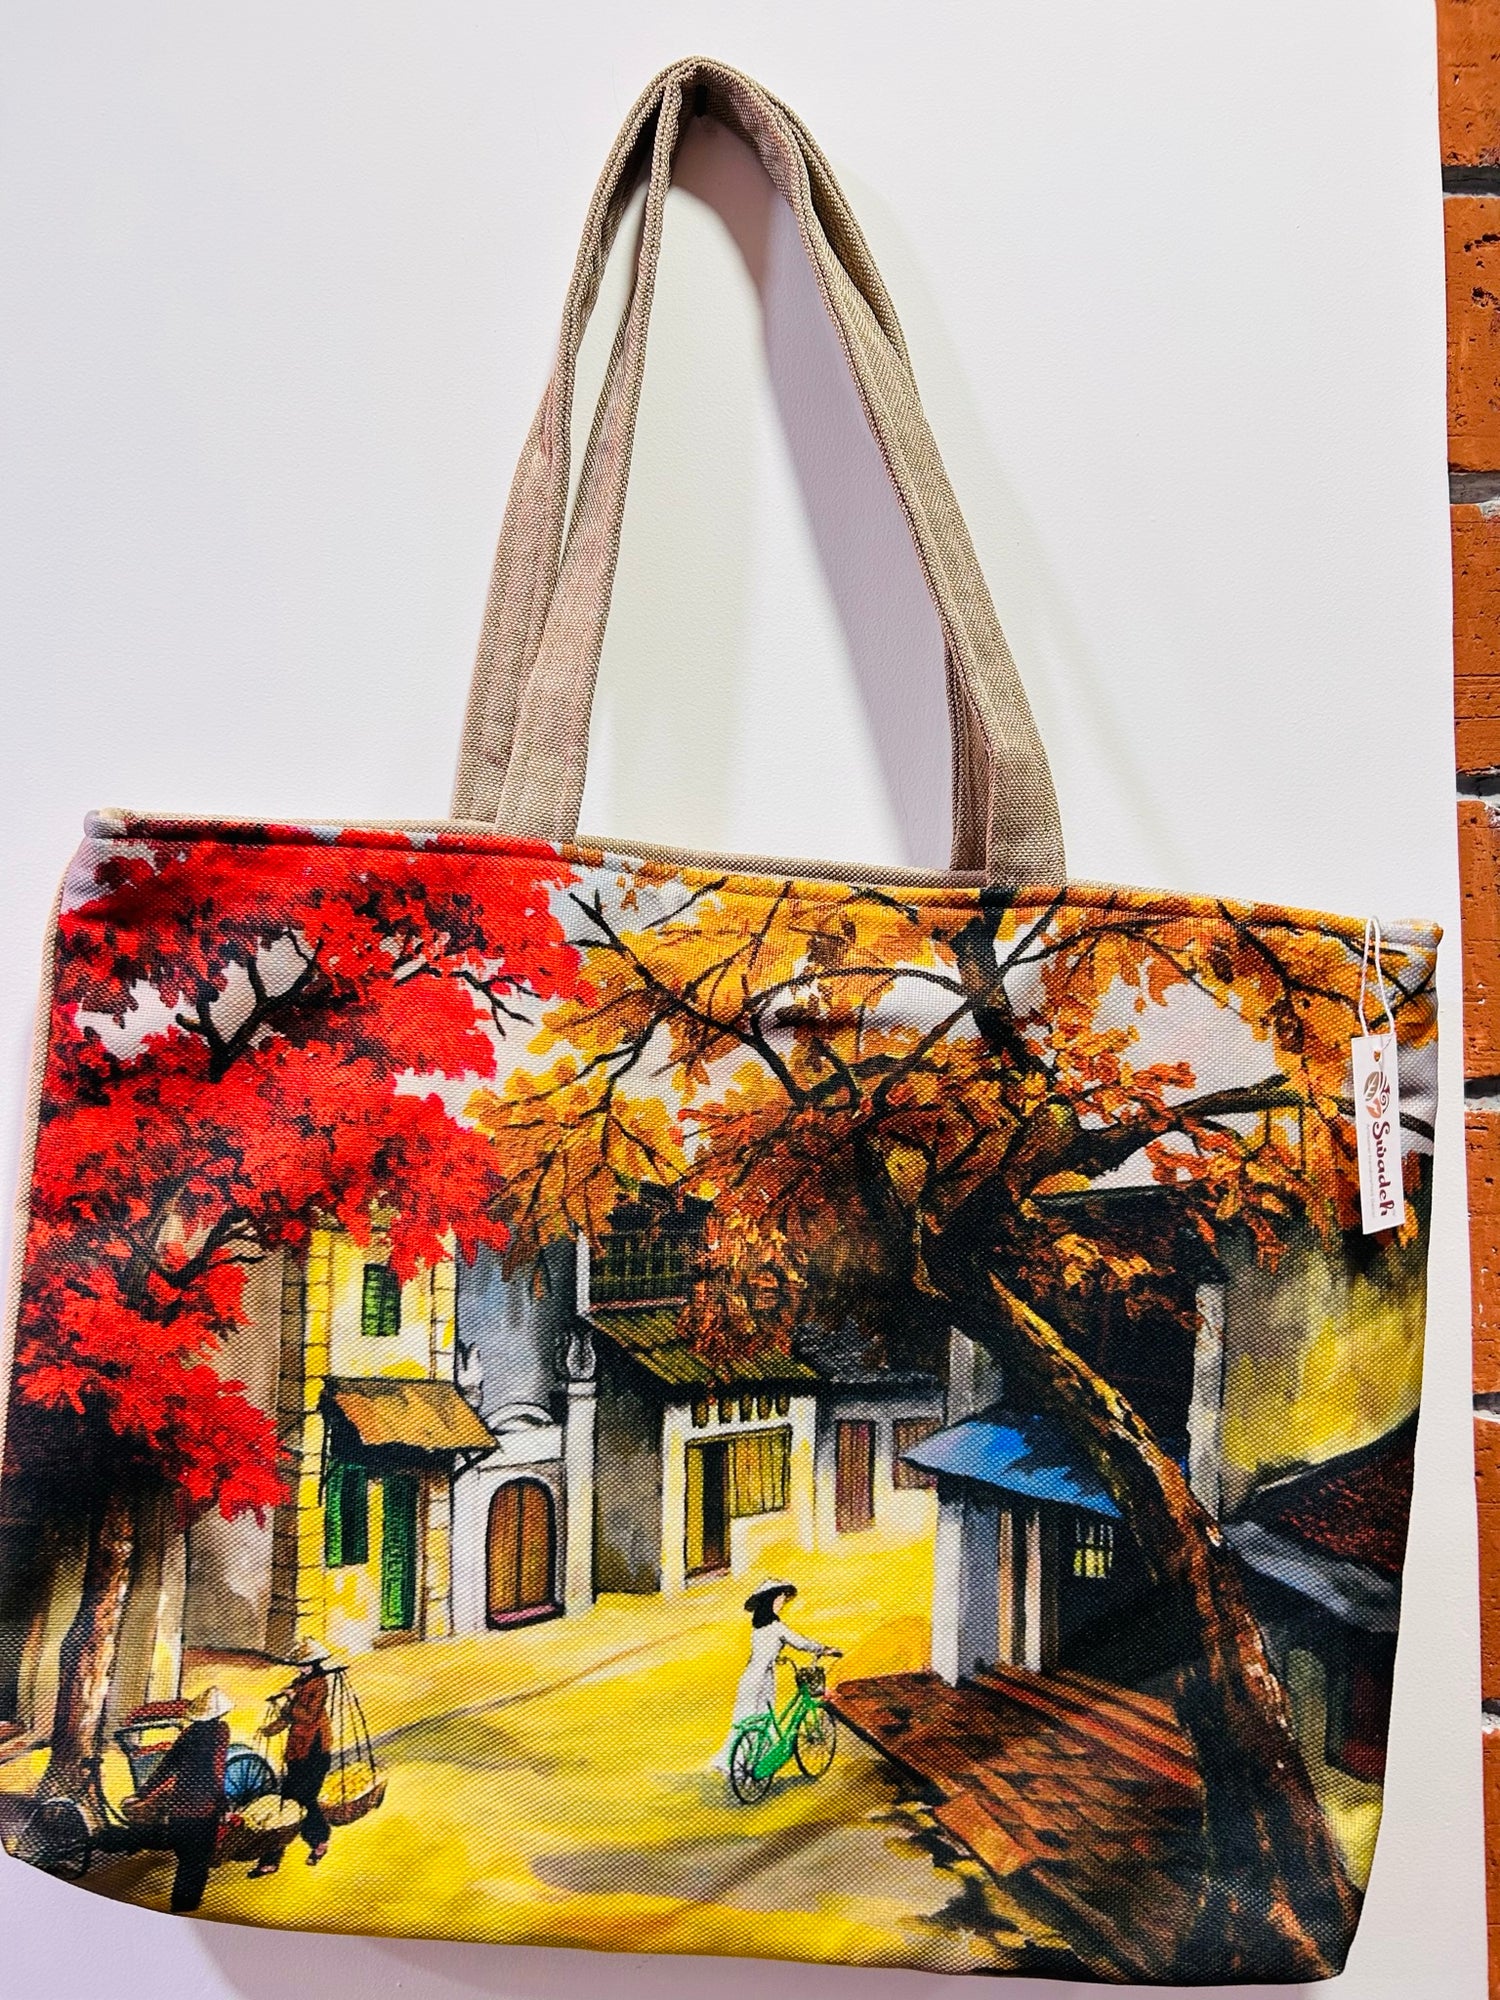 Crafters Scenic Tote Bag